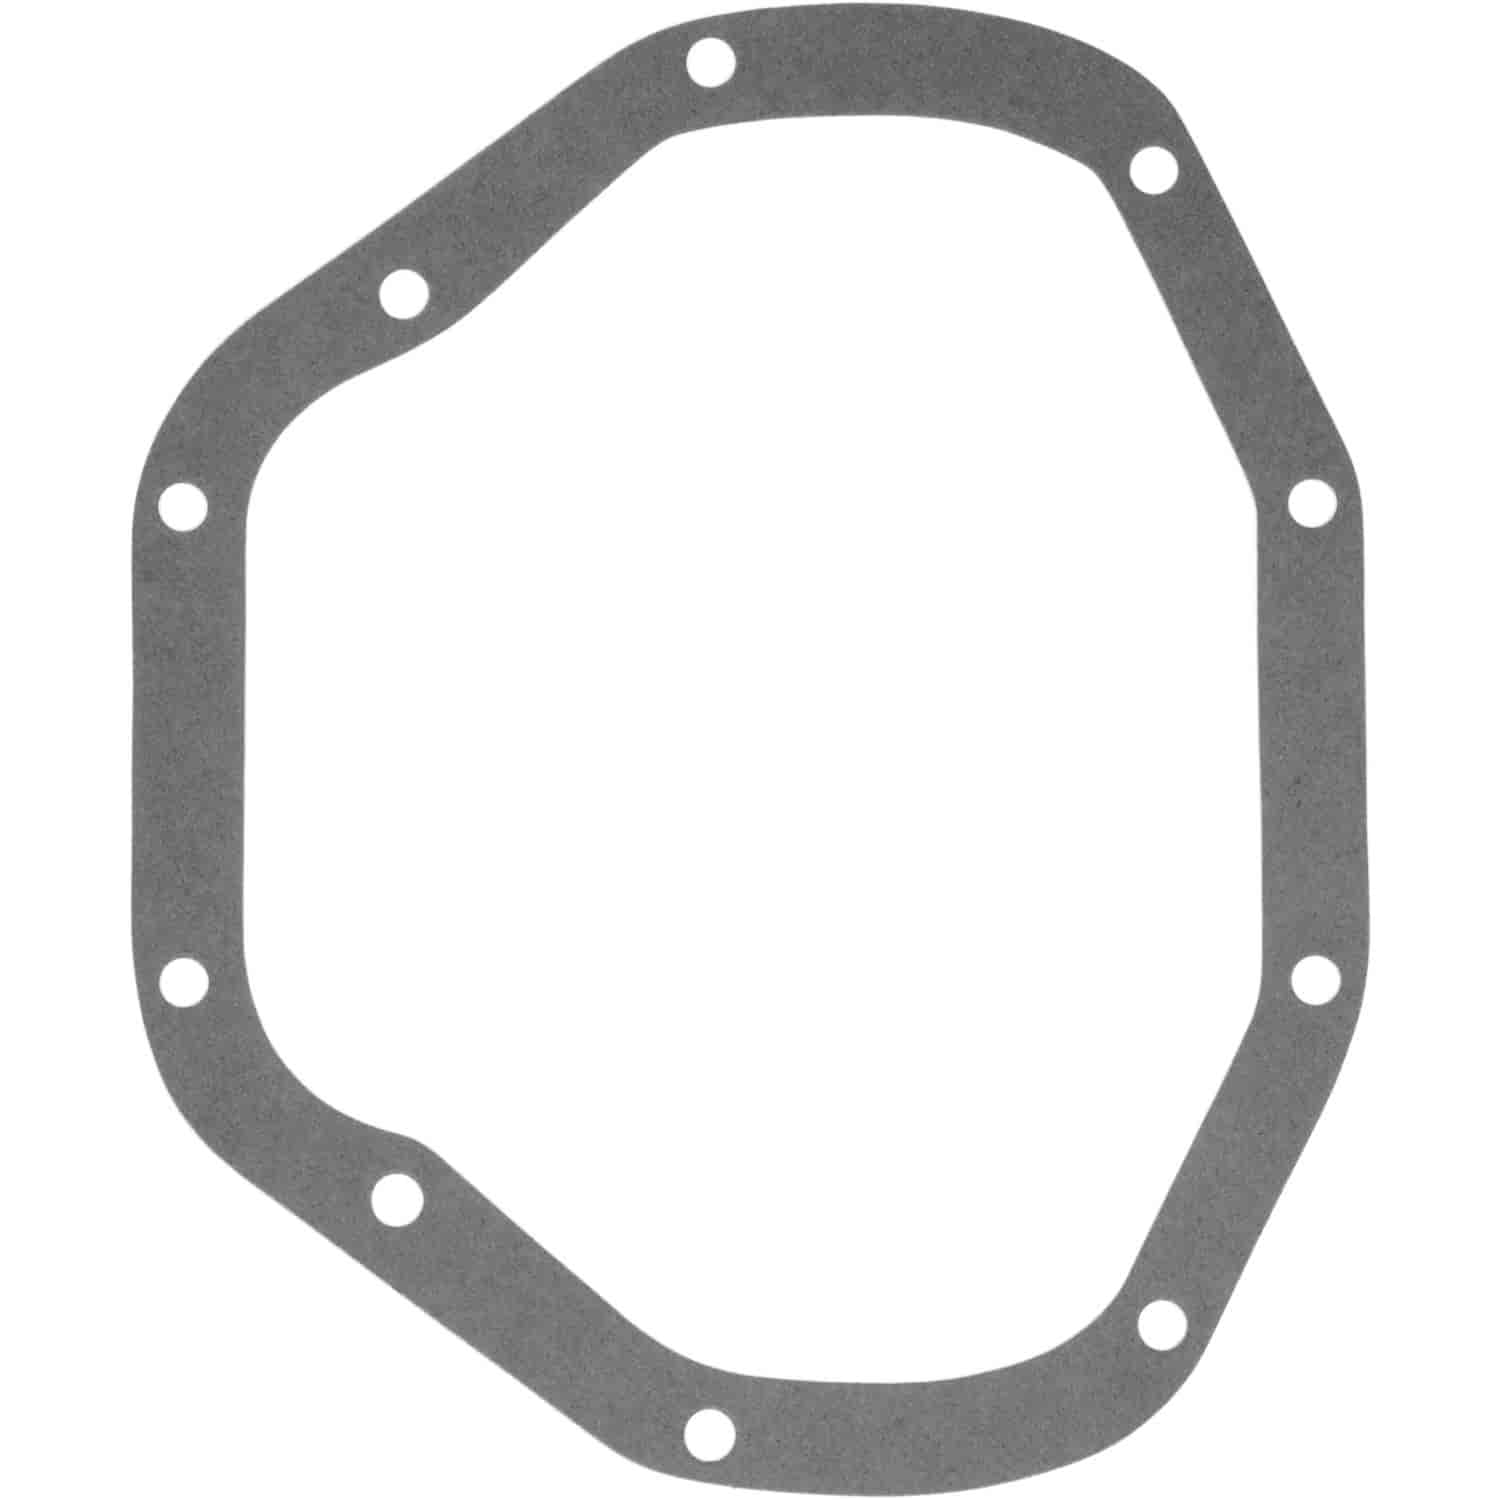 Differential Cover Gasket 10-Bolt Dana 80 (11.5" Ring Gear)